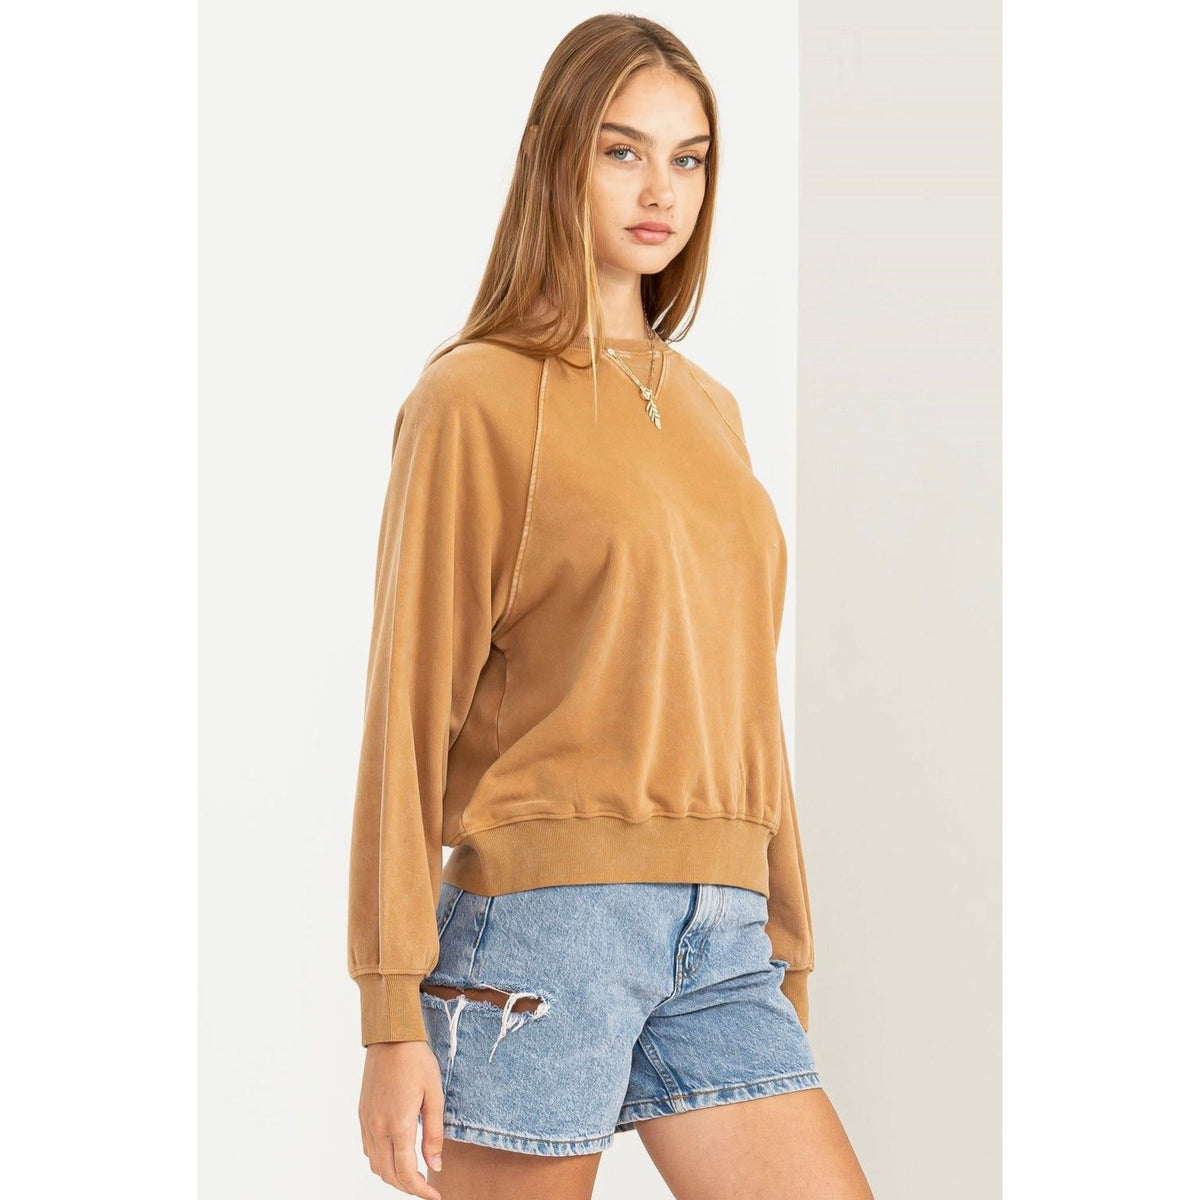 My Chance To Lounge Top (2 Colors)